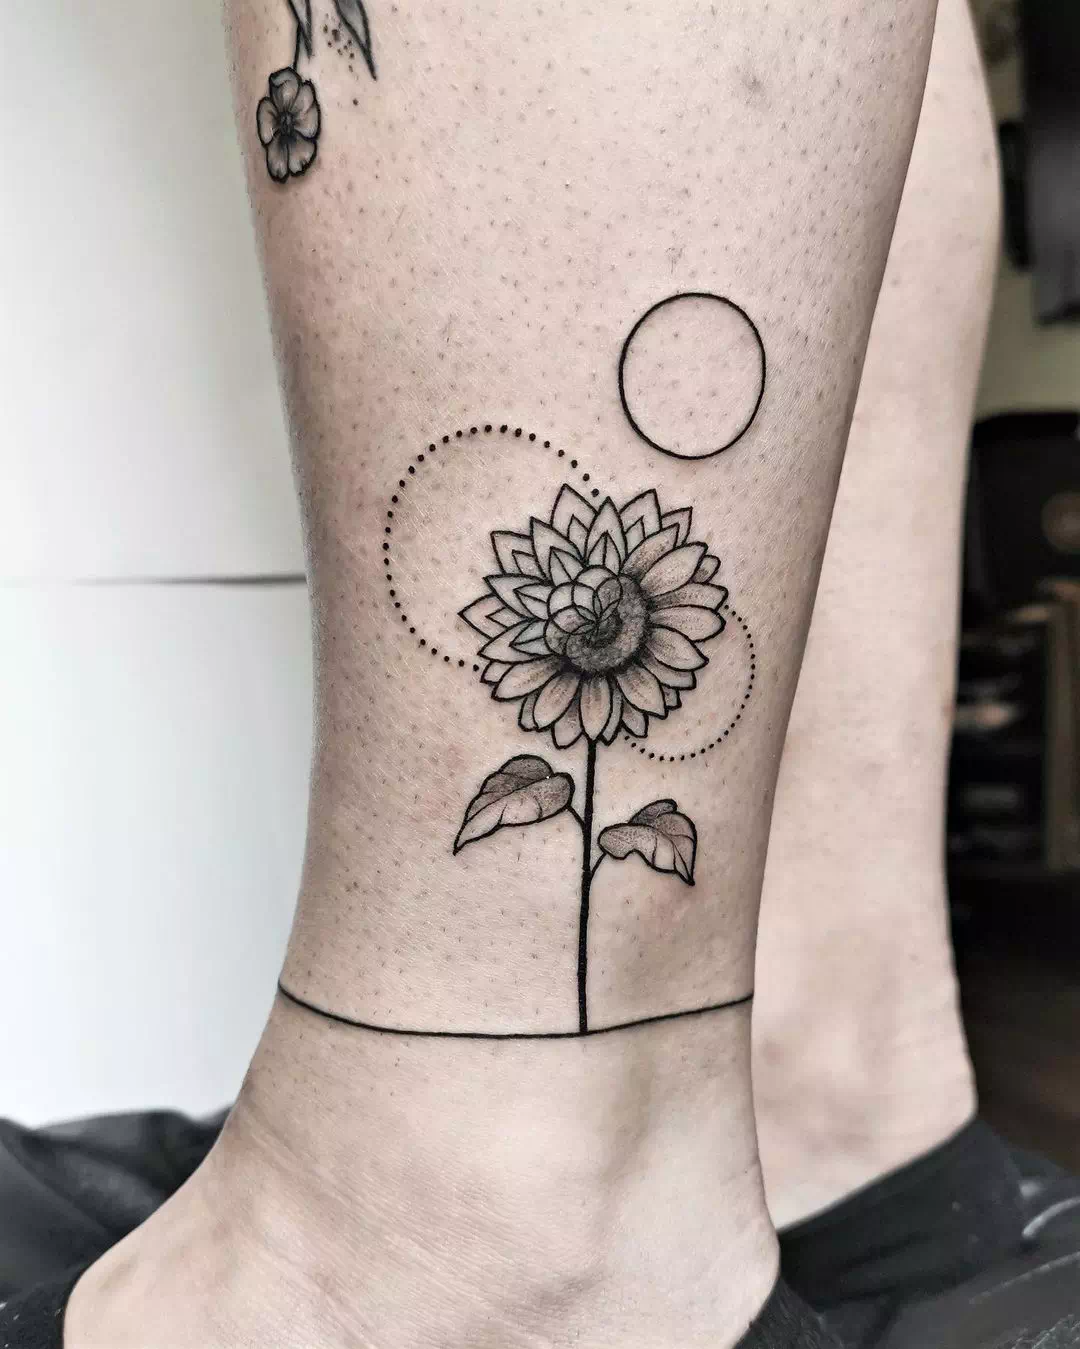 you want to get a sunflower tattoo